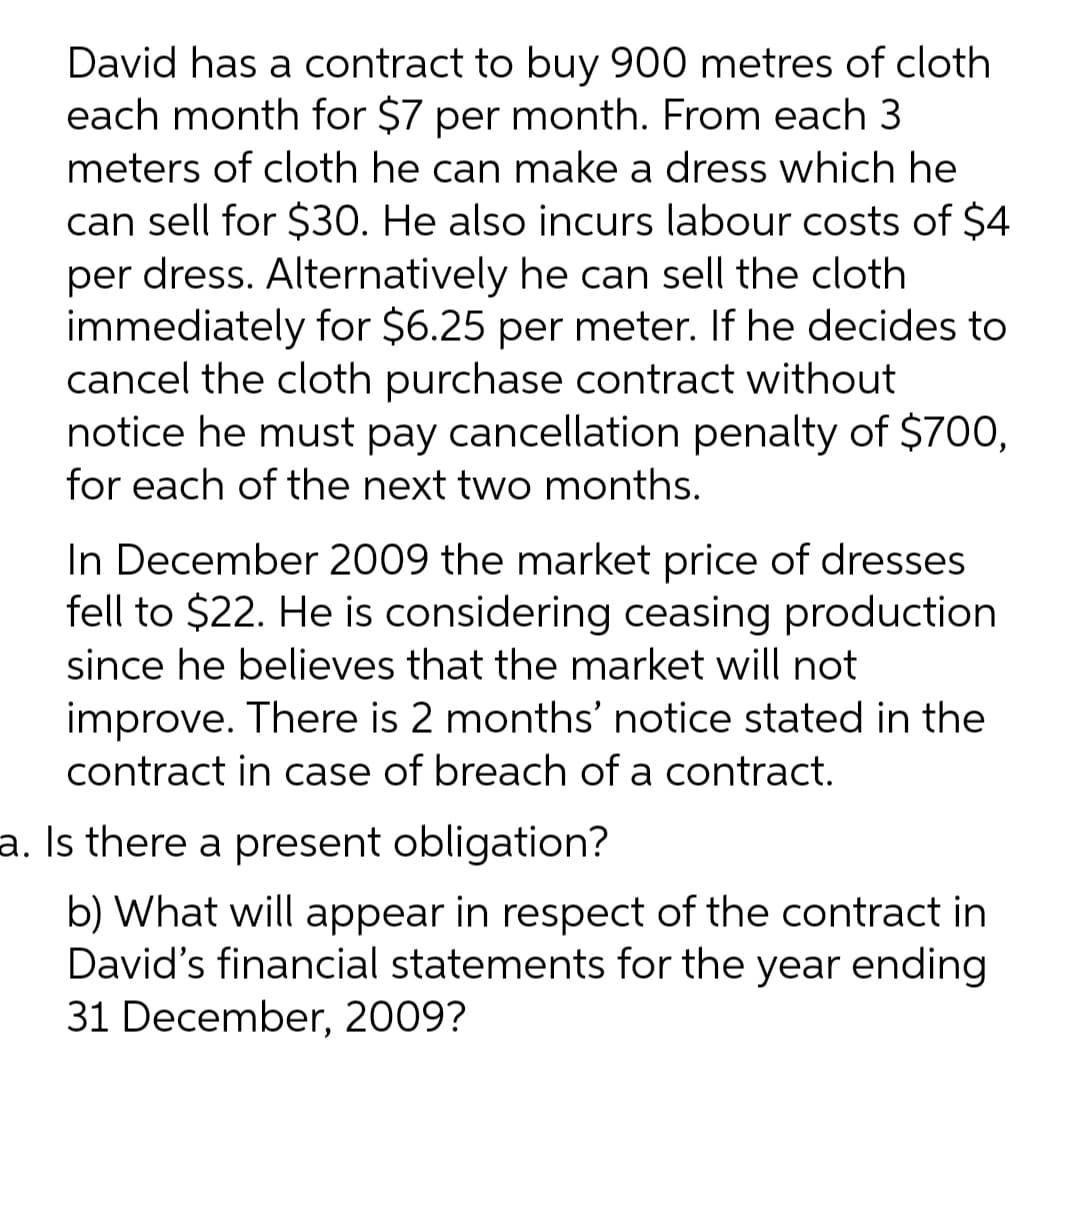 David has a contract to buy 900 metres of cloth
each month for $7 per month. From each 3
meters of cloth he can make a dress which he
can sell for $30. He also incurs labour costs of $4
per dress. Alternatively he can sell the cloth
immediately for $6.25 per meter. If he decides to
cancel the cloth purchase contract without
notice he must pay cancellation penalty of $700,
for each of the next two months.
In December 2009 the market price of dresses
fell to $22. He is considering ceasing production
since he believes that the market will not
improve. There is 2 months' notice stated in the
contract in case of breach of a contract.
a. Is there a present obligation?
b) What will appear in respect of the contract in
David's financial statements for the year ending
31 December, 2009?
